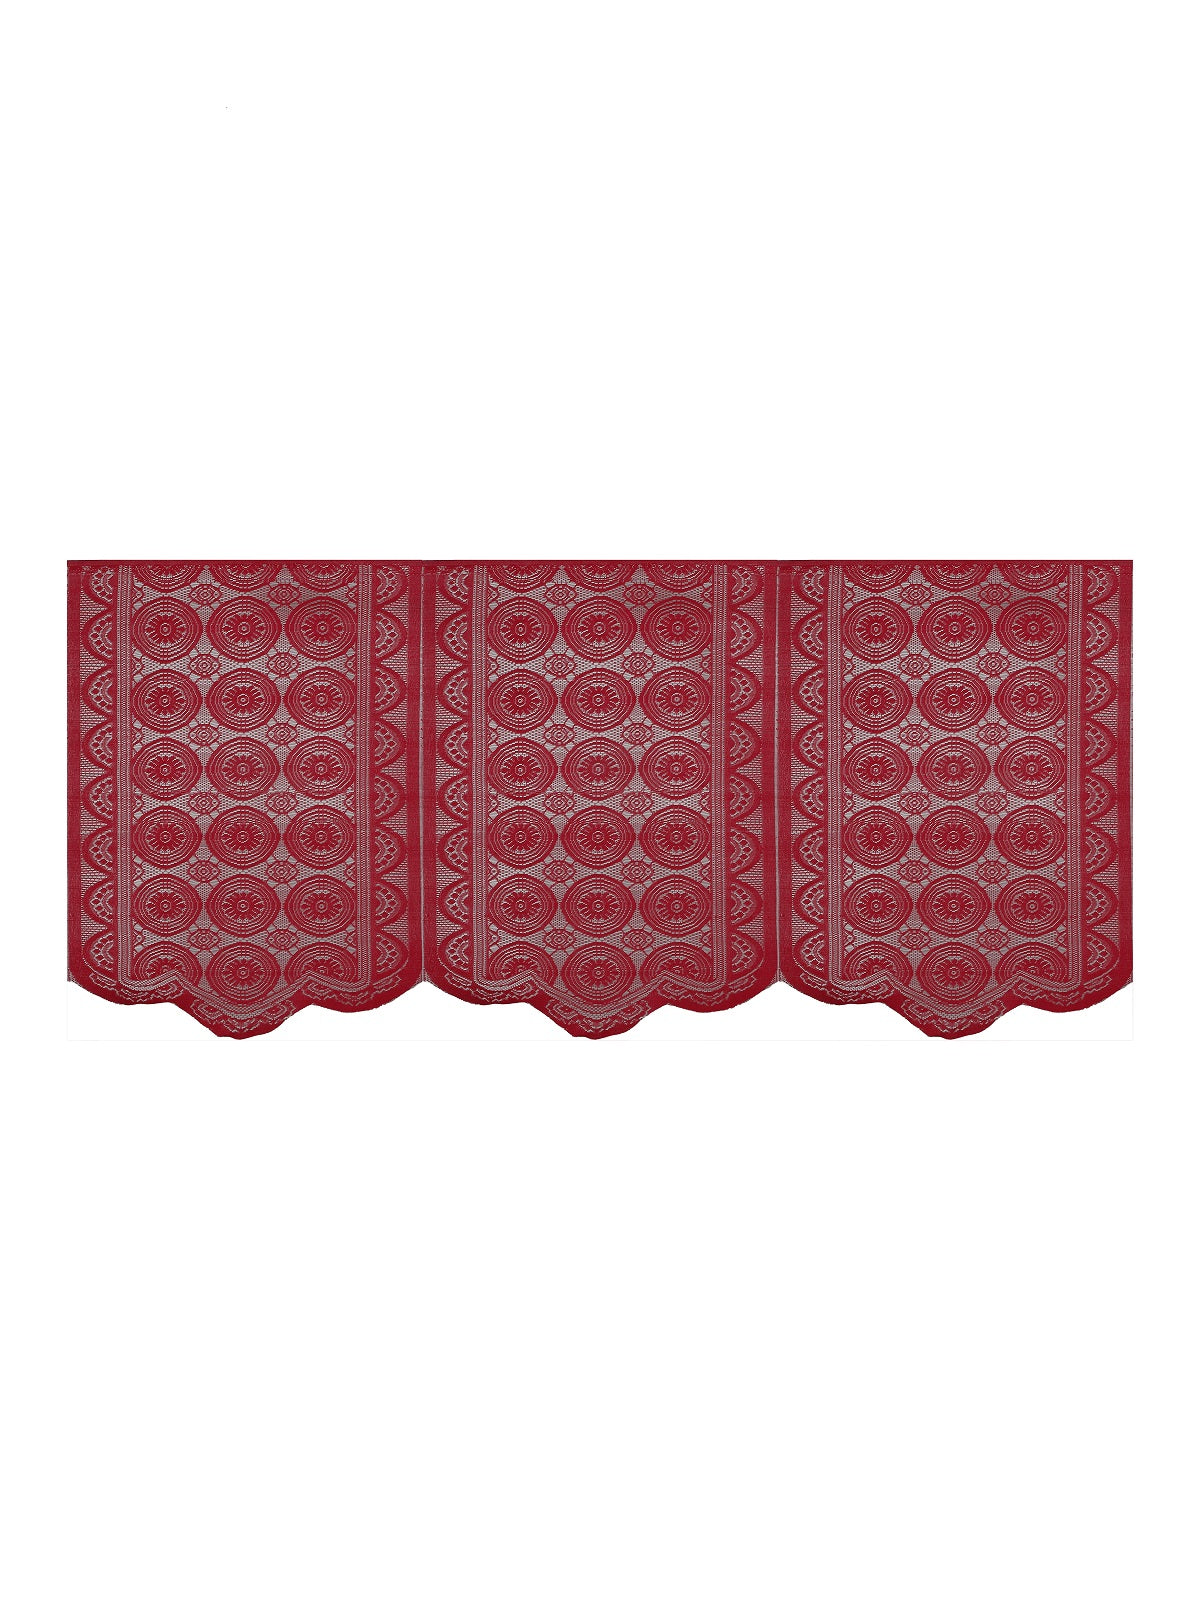 Romee 6-pieces maroon floral patterned 5-seater sofa covers slpss77